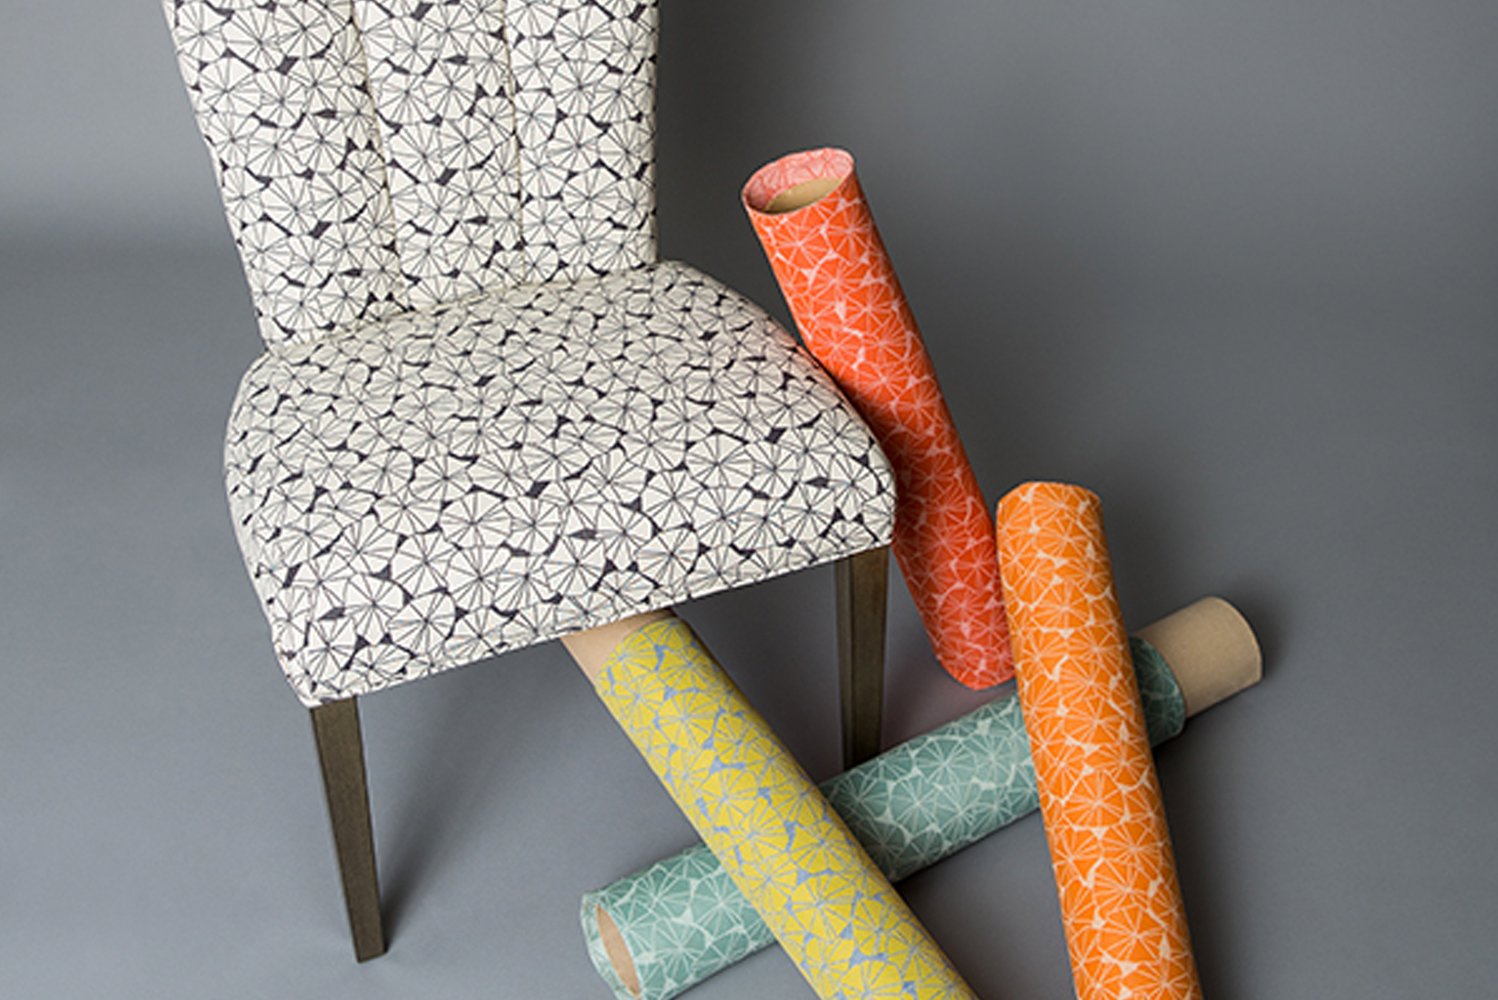 Introducing the Clearwater collection from Brentano